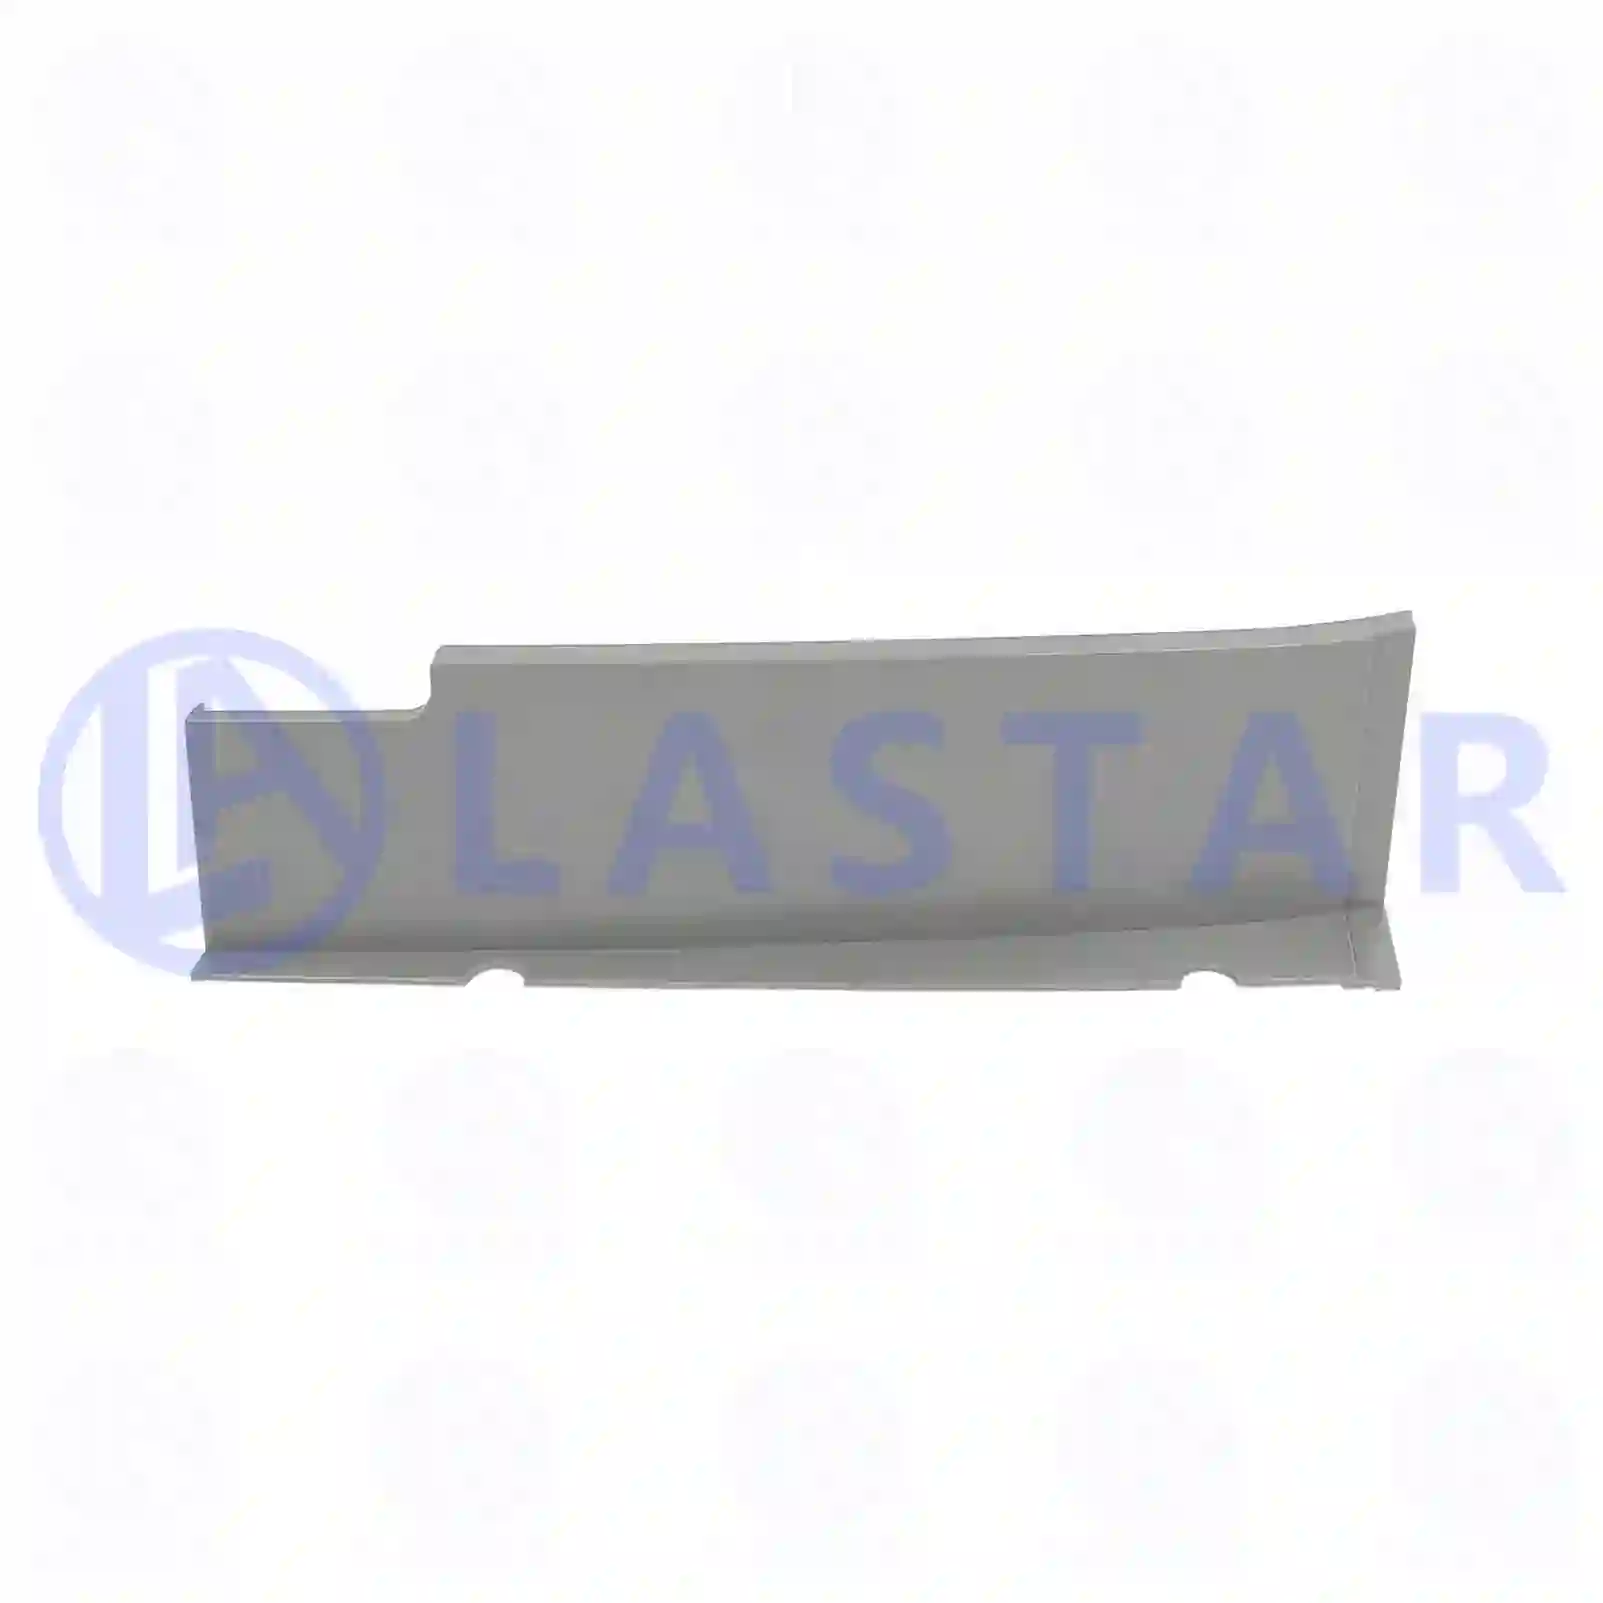 Spacer, left, white, 77721010, 1621182 ||  77721010 Lastar Spare Part | Truck Spare Parts, Auotomotive Spare Parts Spacer, left, white, 77721010, 1621182 ||  77721010 Lastar Spare Part | Truck Spare Parts, Auotomotive Spare Parts